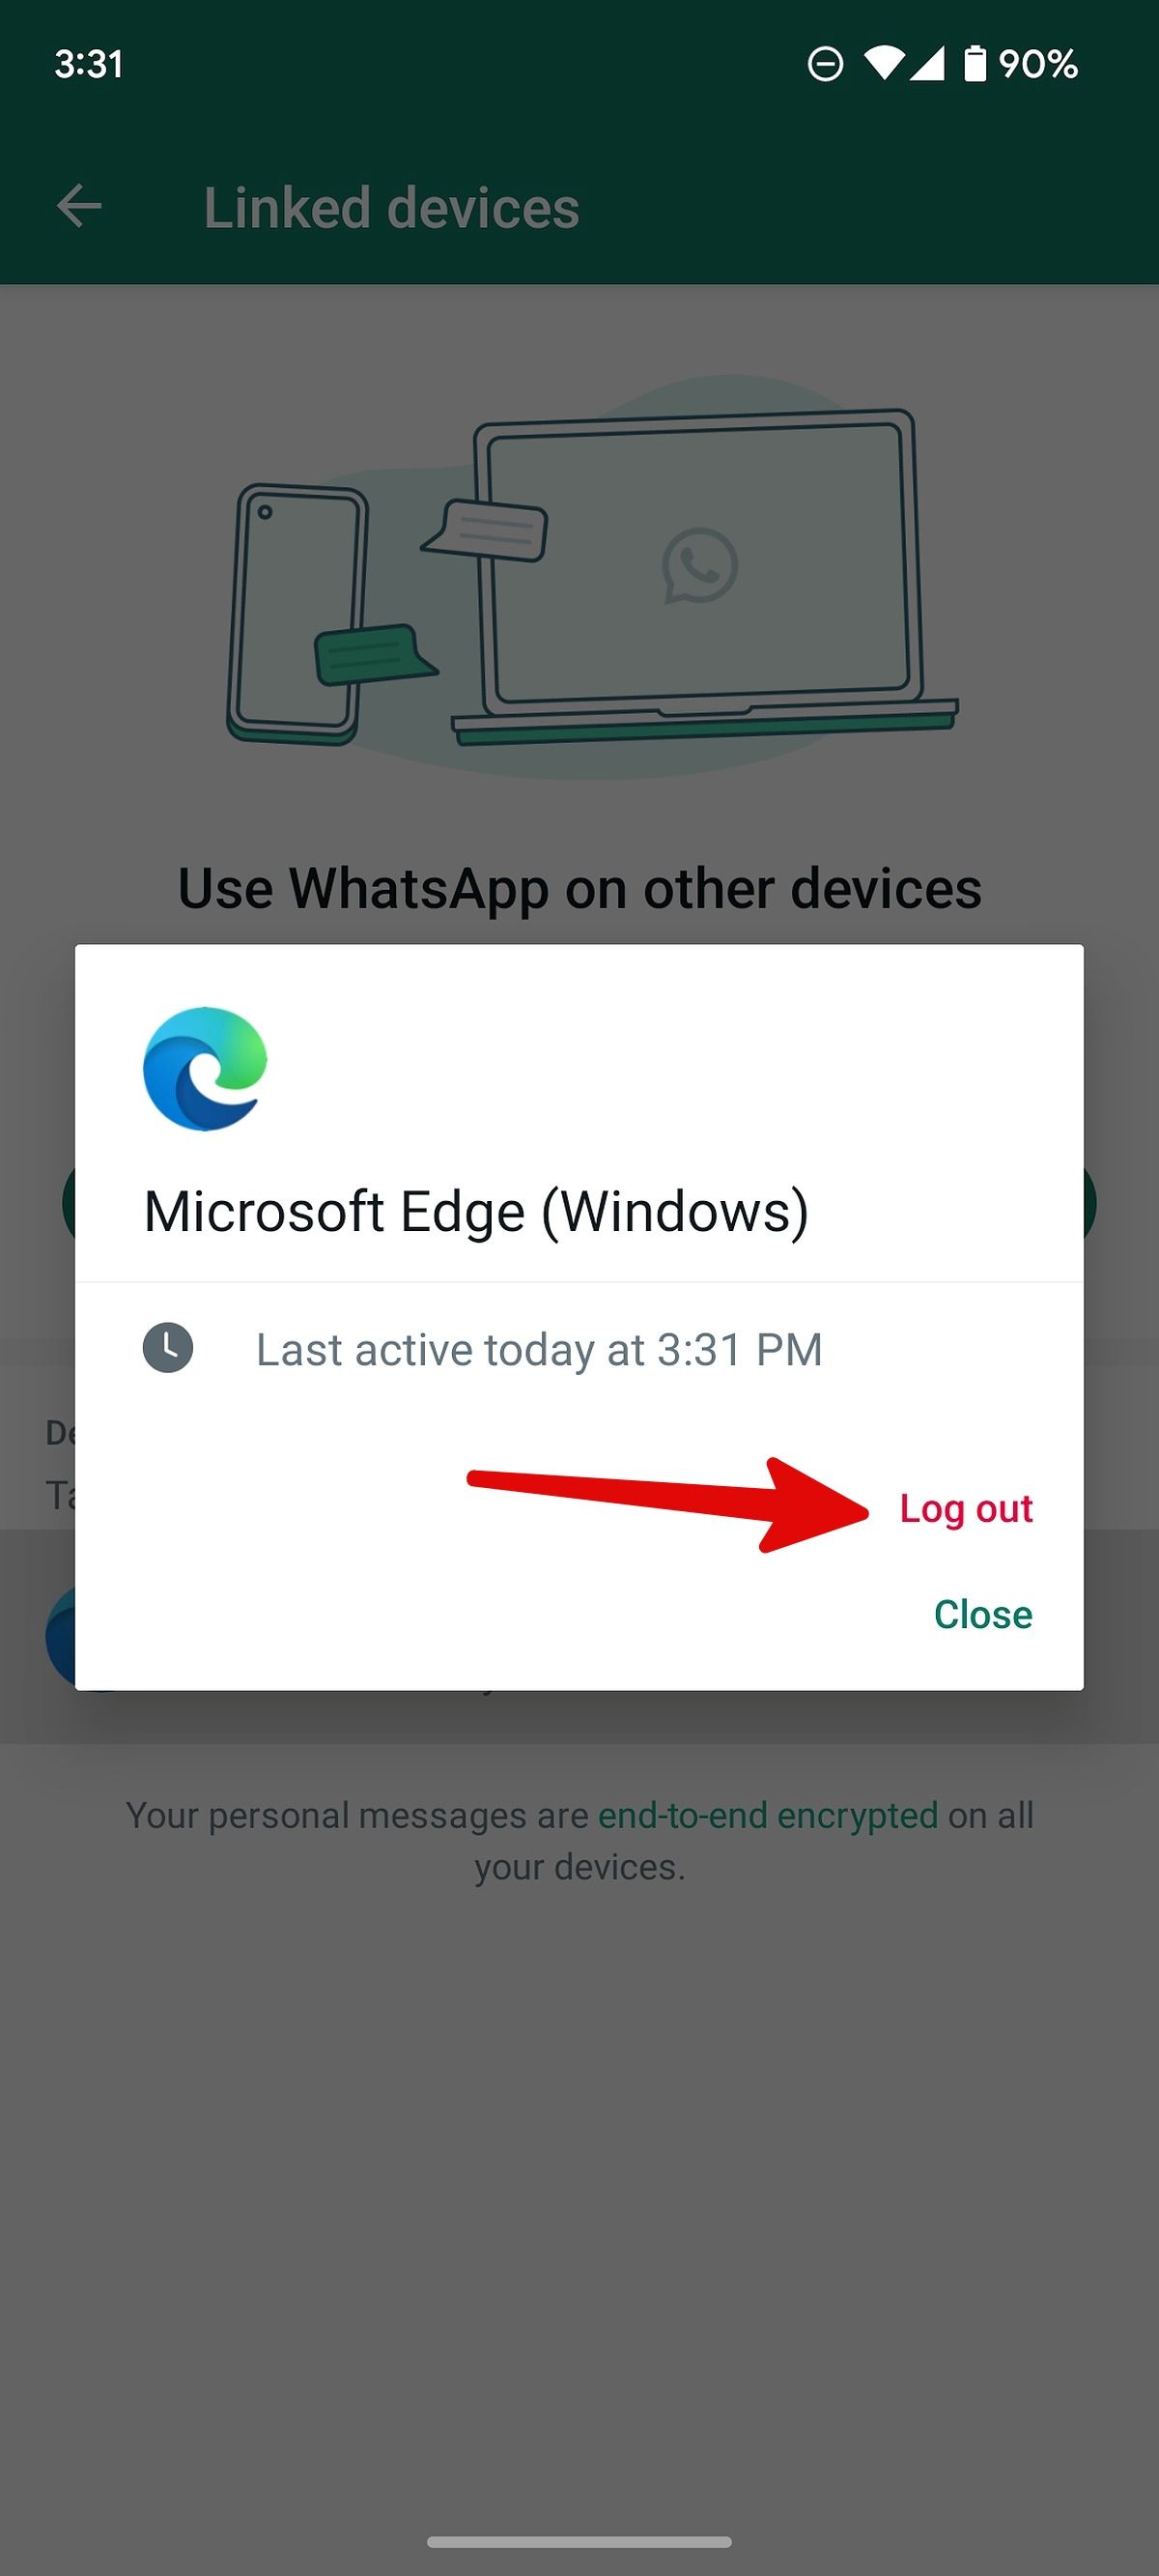 log out from linked device on WhatsApp